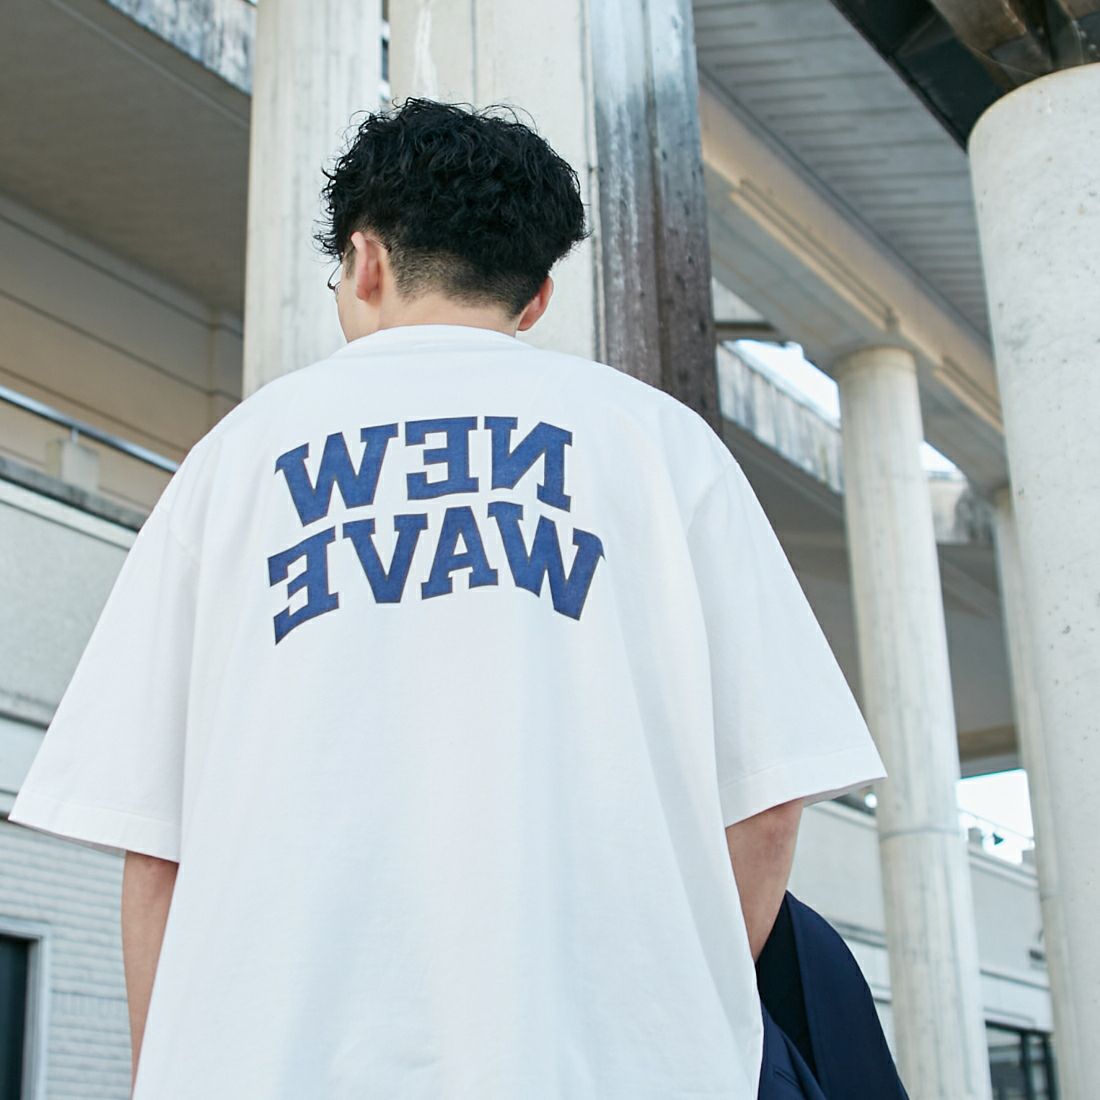 blurhms ROOTSTOCK [ブラームス ルーツストック] 別注 NEW WAVE プリントTシャツ [BROOTS24S34-JF] WHITE &&モデル身長：168cm 着用サイズ：3&&